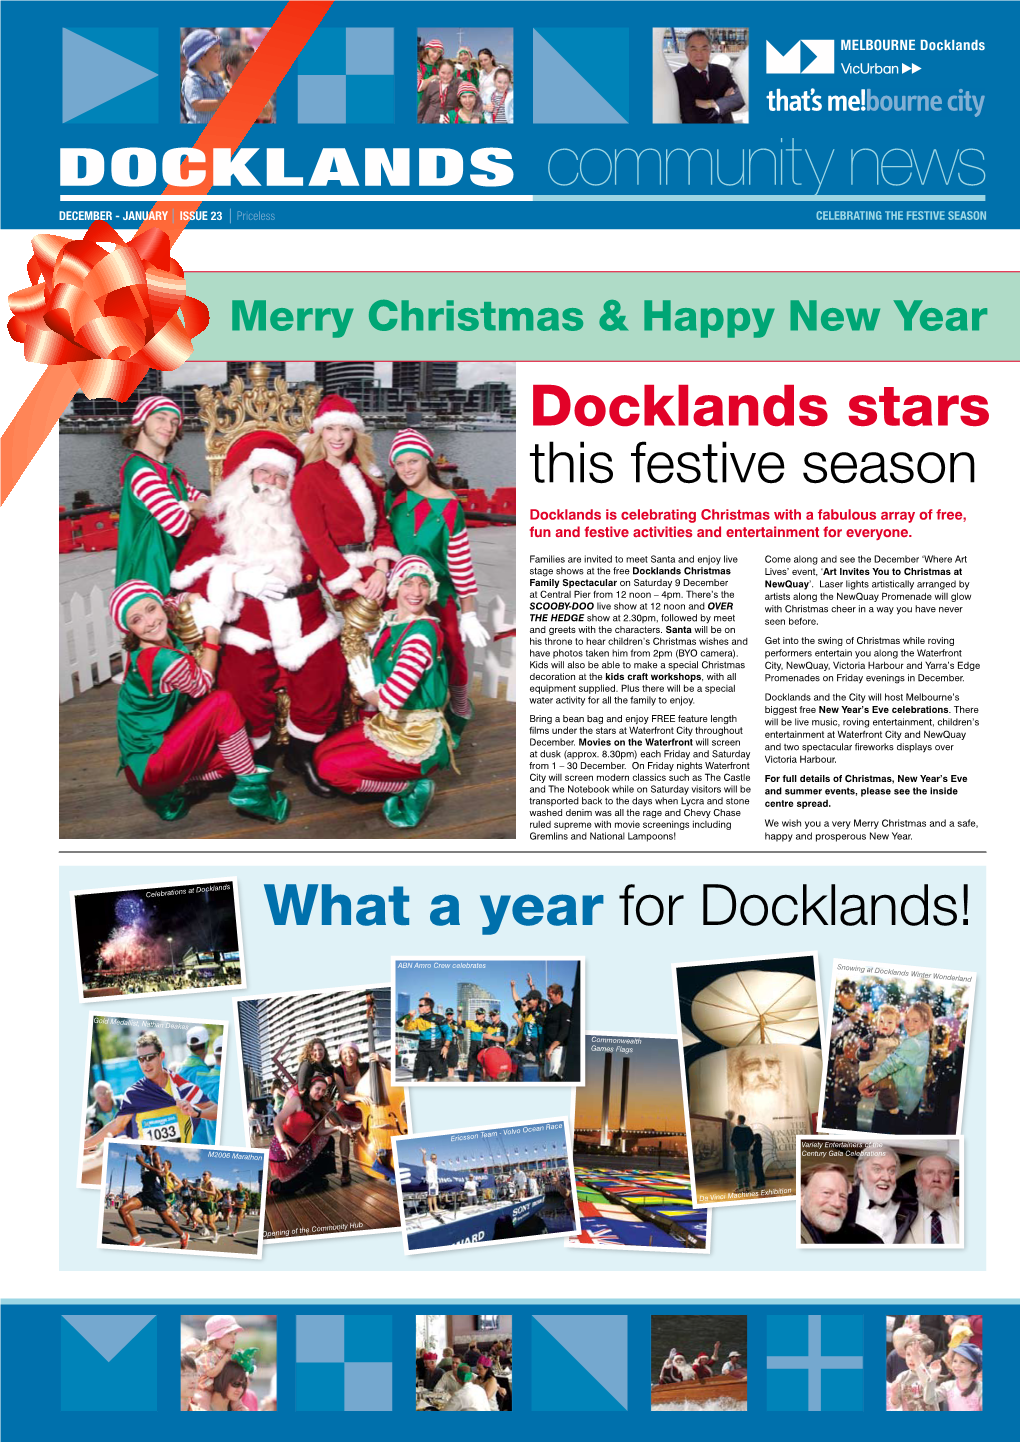 Docklands Stars This Festive Season What a Year for Docklands!